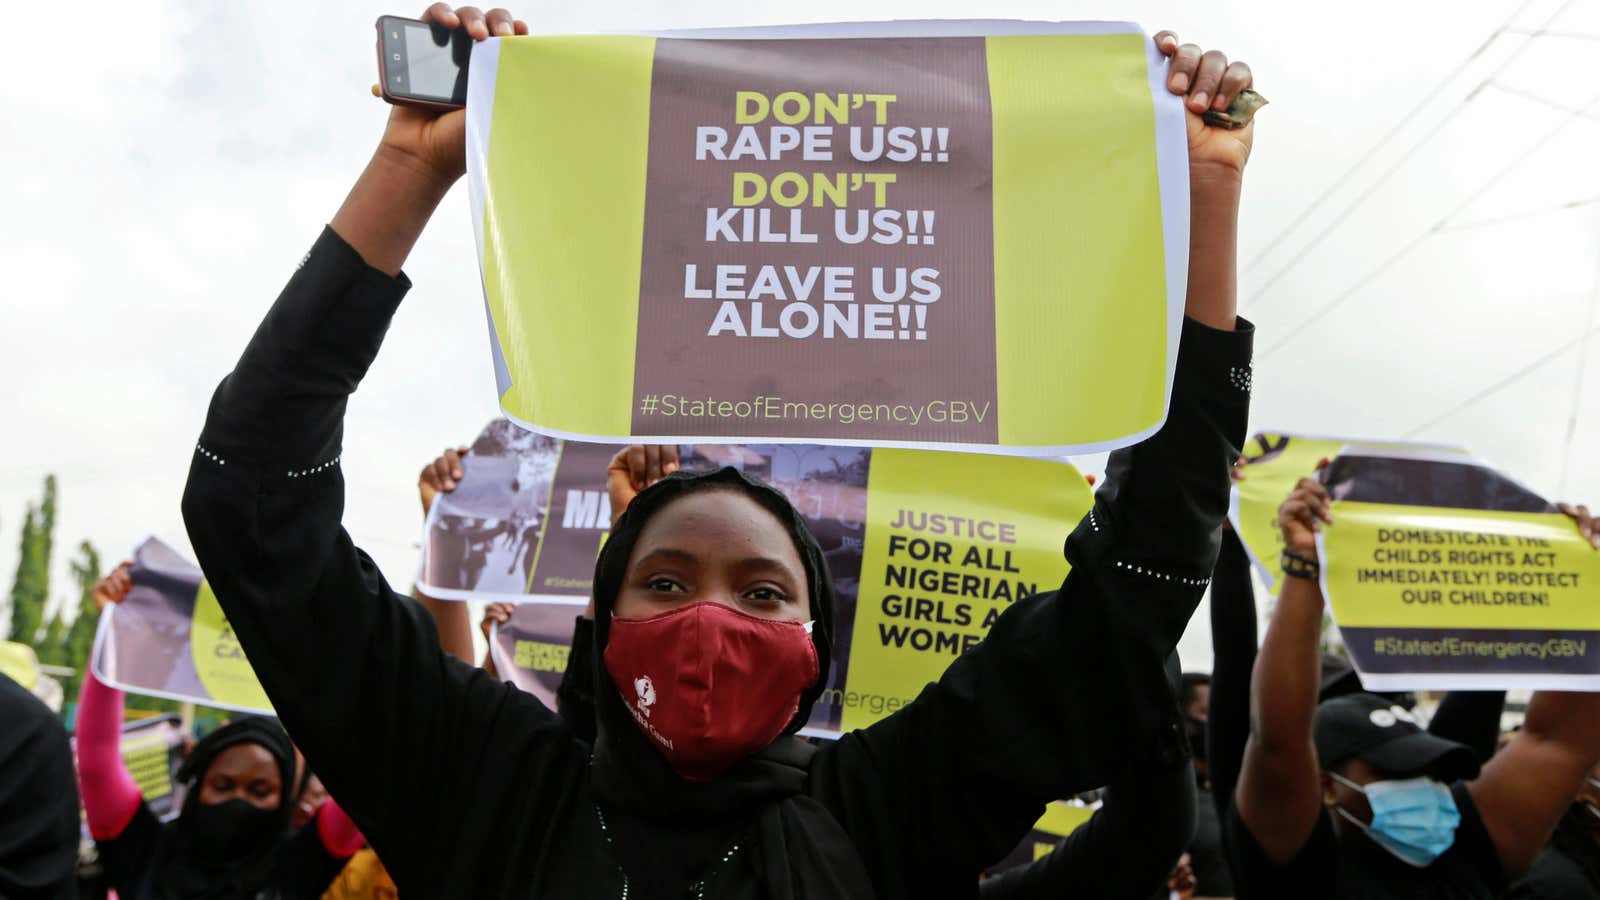 Protests against sexual violence have broken out in Nigerian cities after high profile incidents.